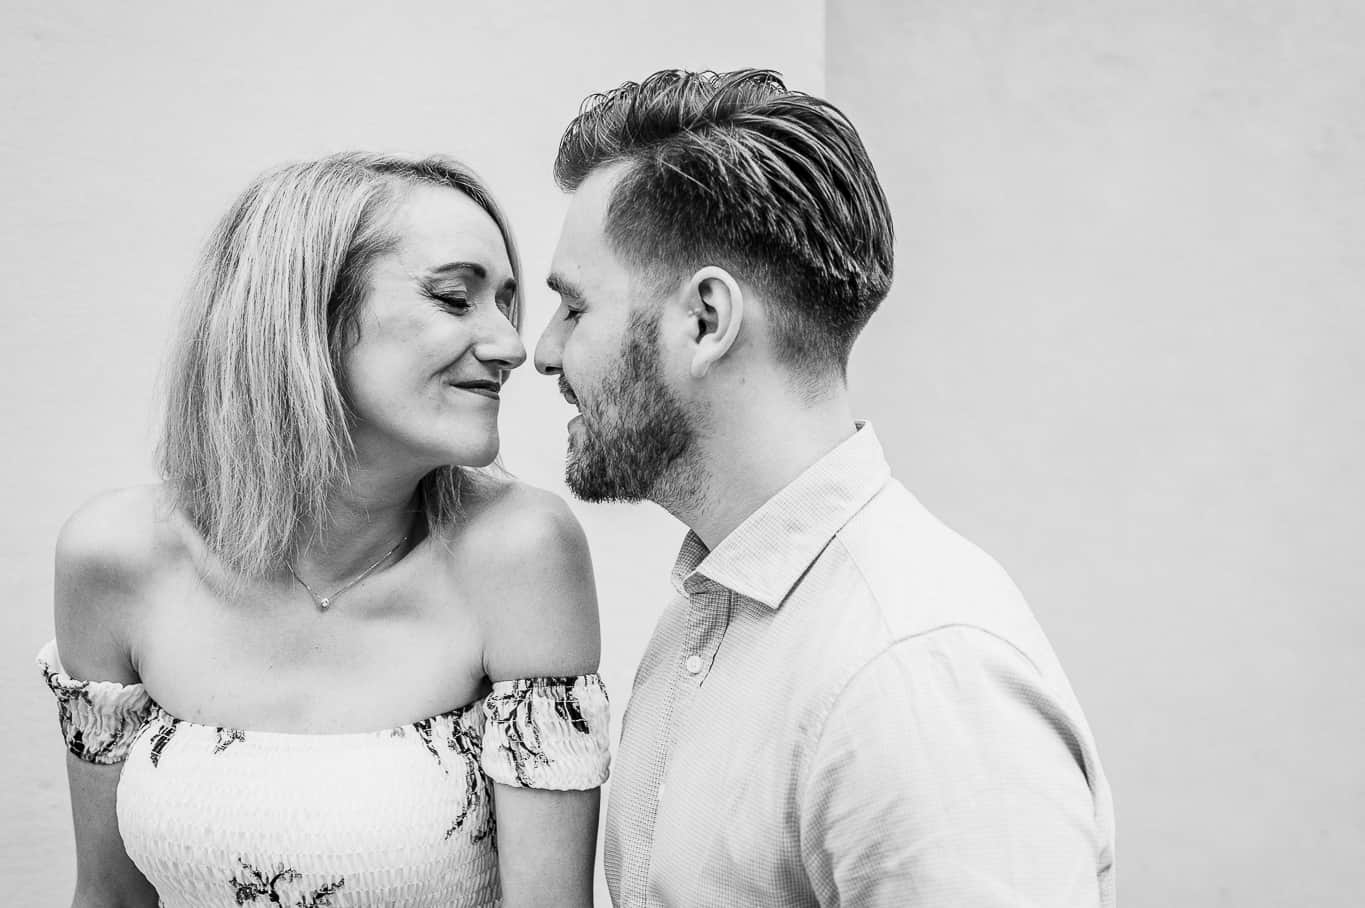 Couple touching noses and giggling during an engagement photoshoot in black and white in Rome Italy